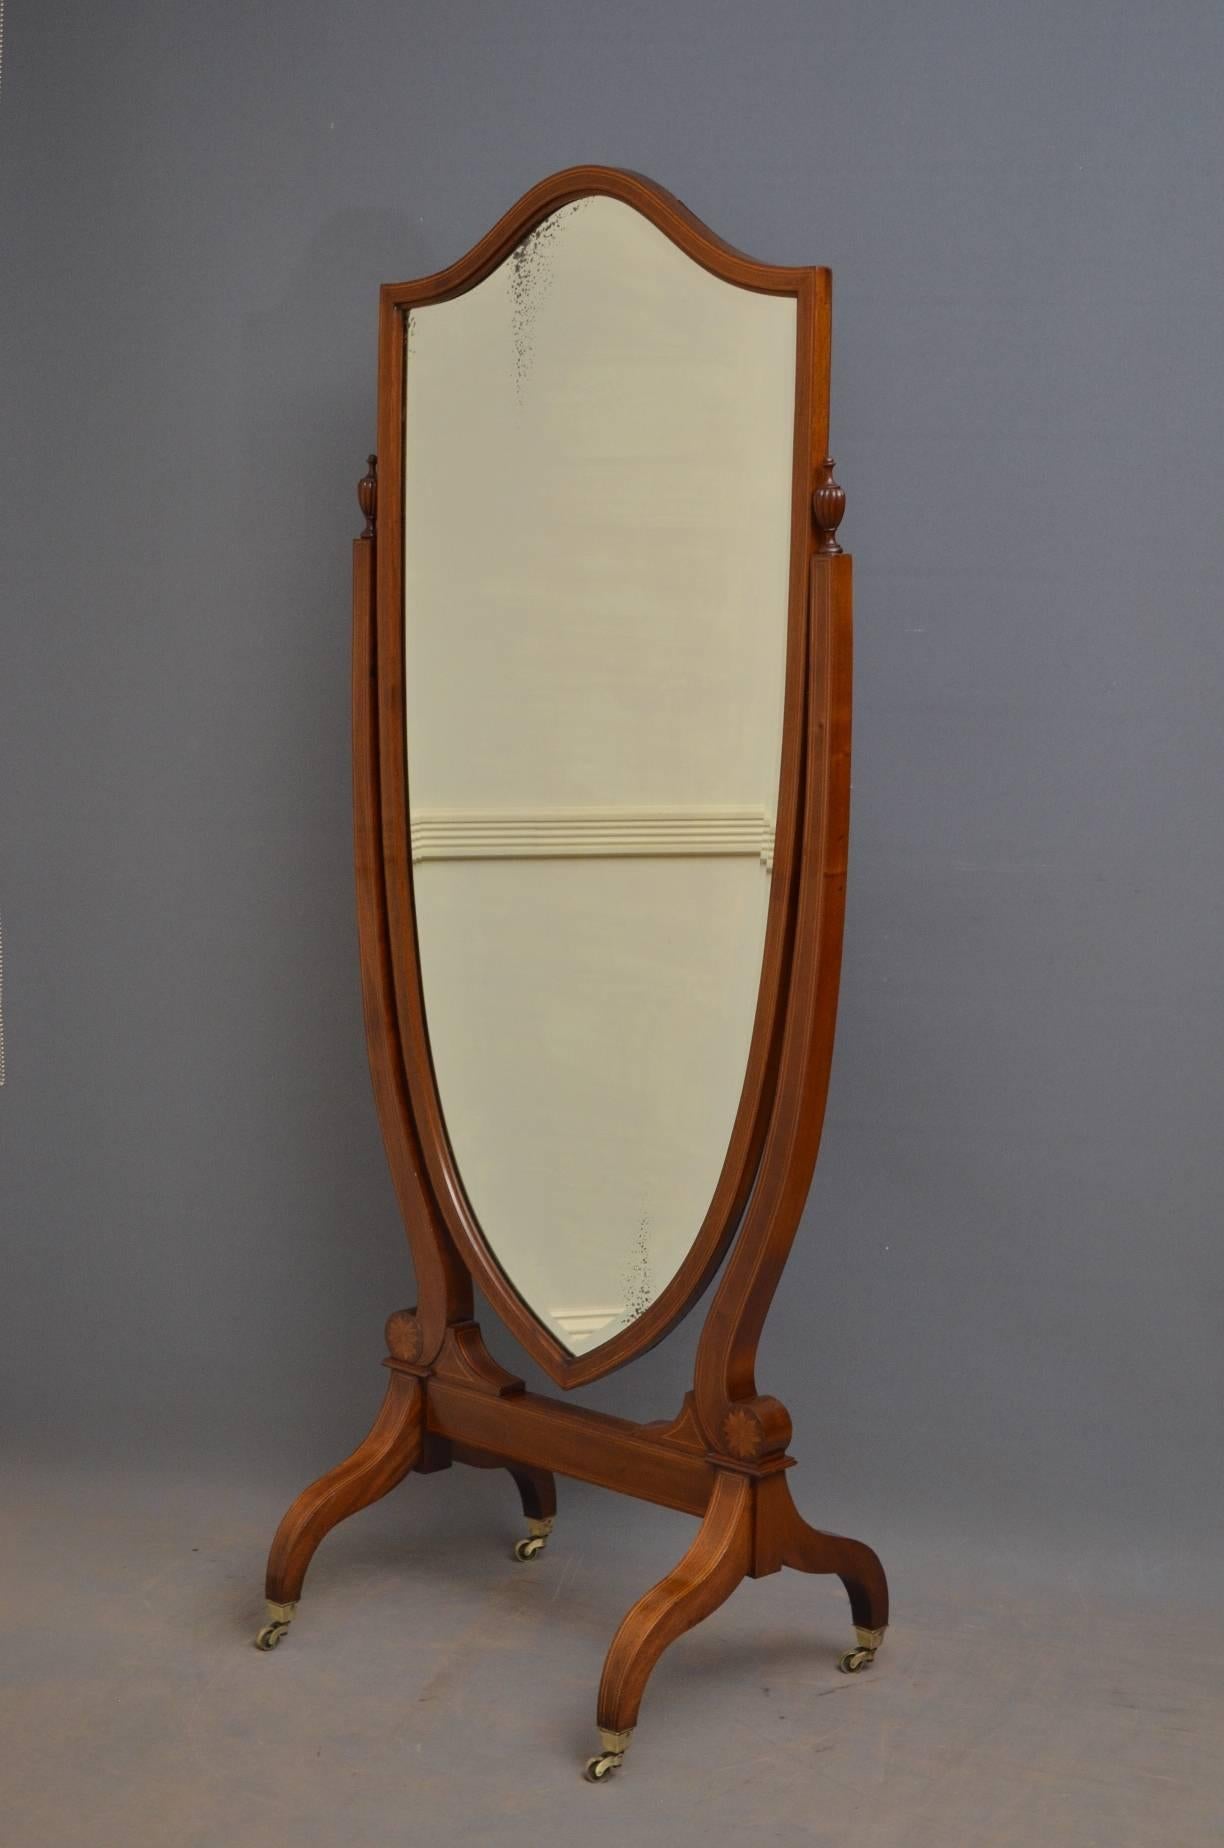 Sn4126 Edwardian mahogany and inlaid, shield shaped cheval mirror, having original bevelled edge mirror in inlaid frame and finely inlaid supports with original fluted finials to top and fan inlays to base, standing on downswpet legs terminating in